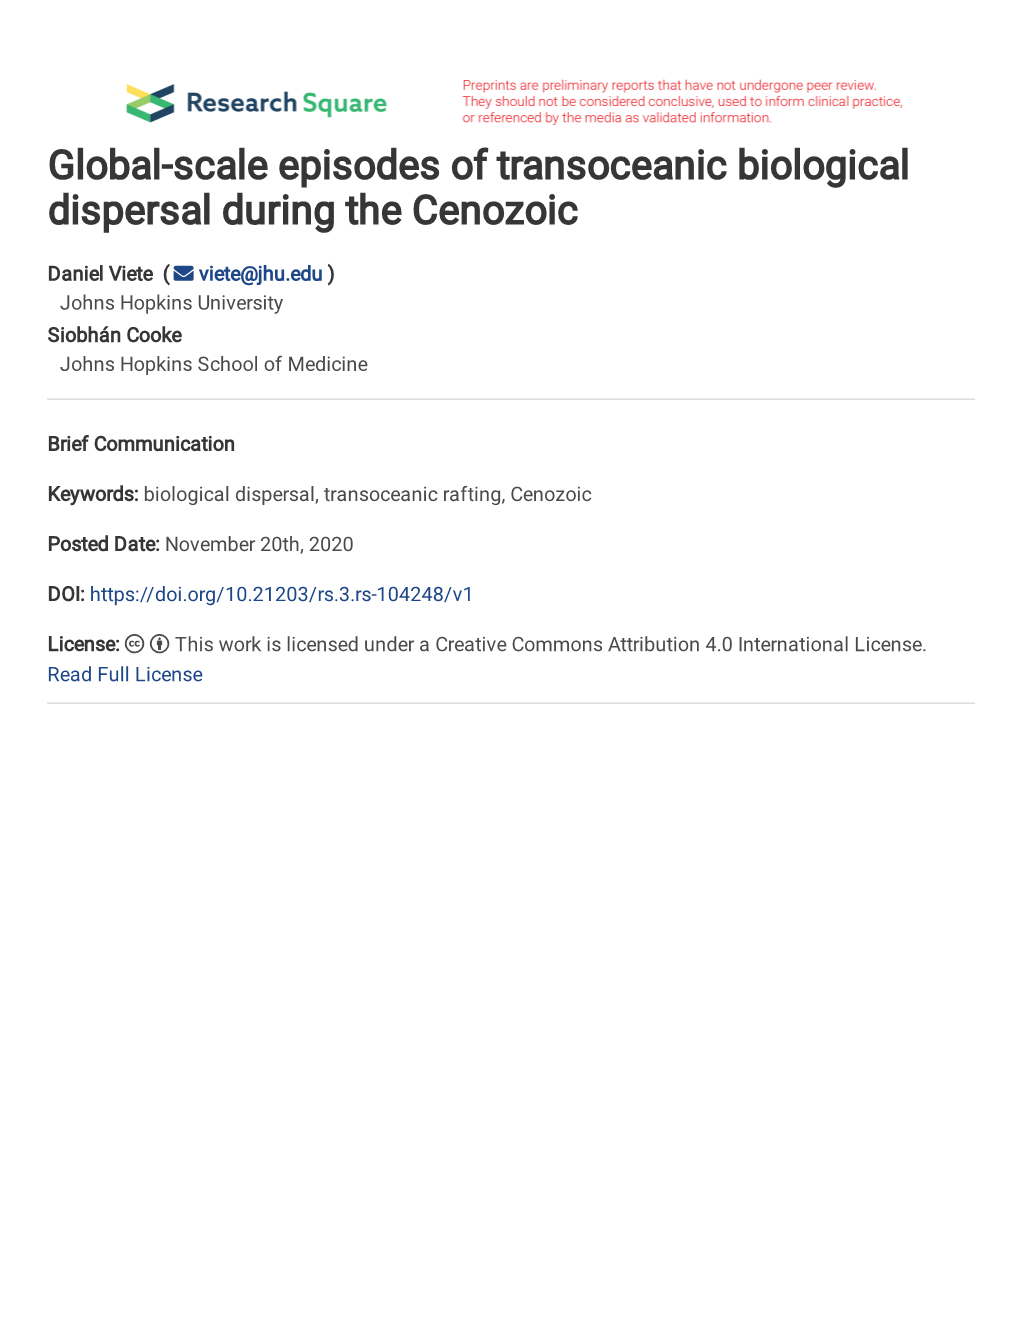 Global-Scale Episodes of Transoceanic Biological Dispersal During the Cenozoic